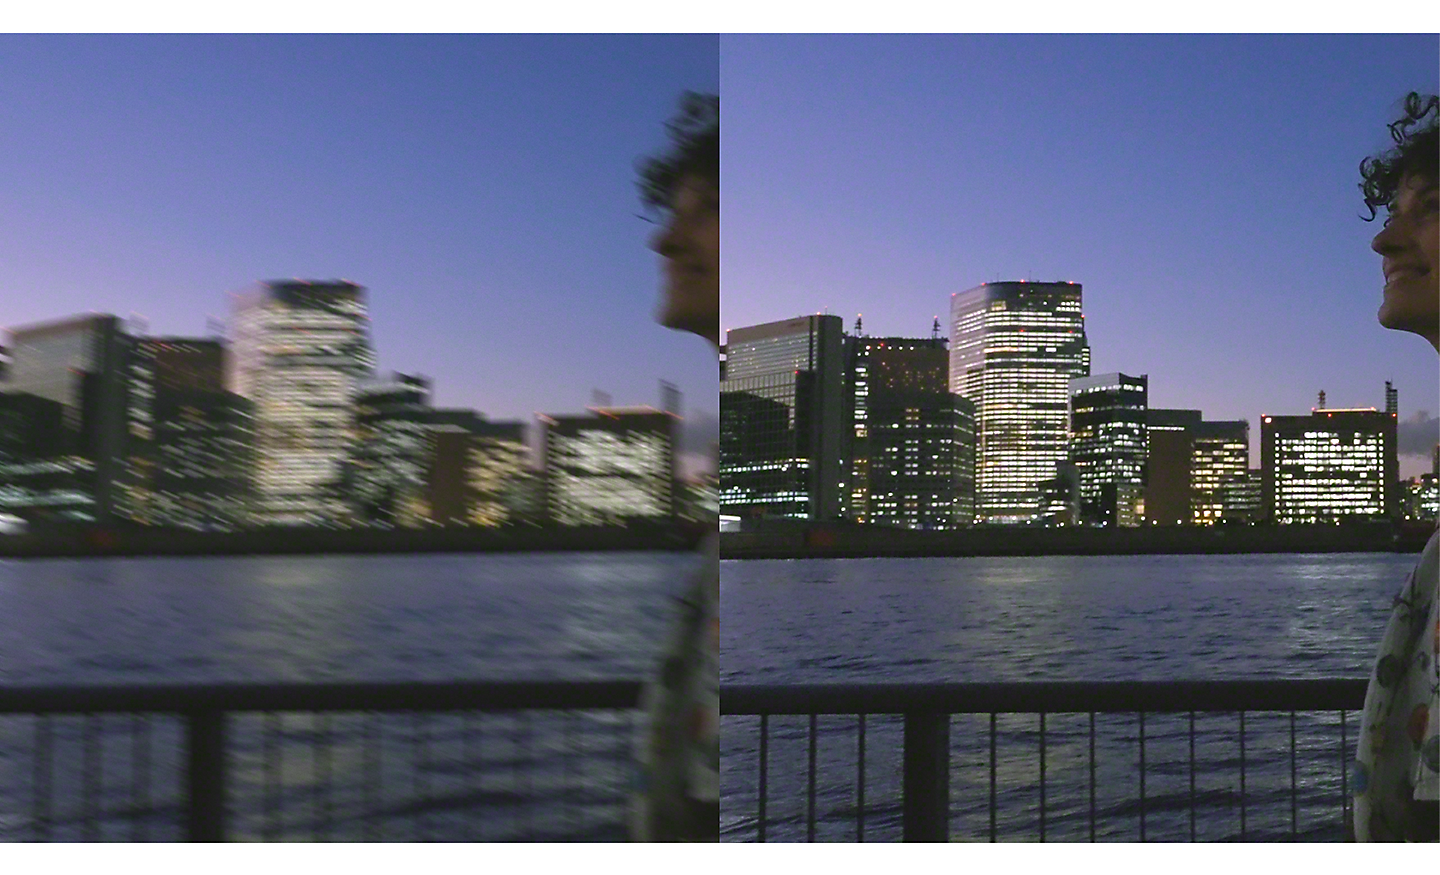 Dual image of a cityscape at night - the image on the left is blurred, the one on the right is sharp